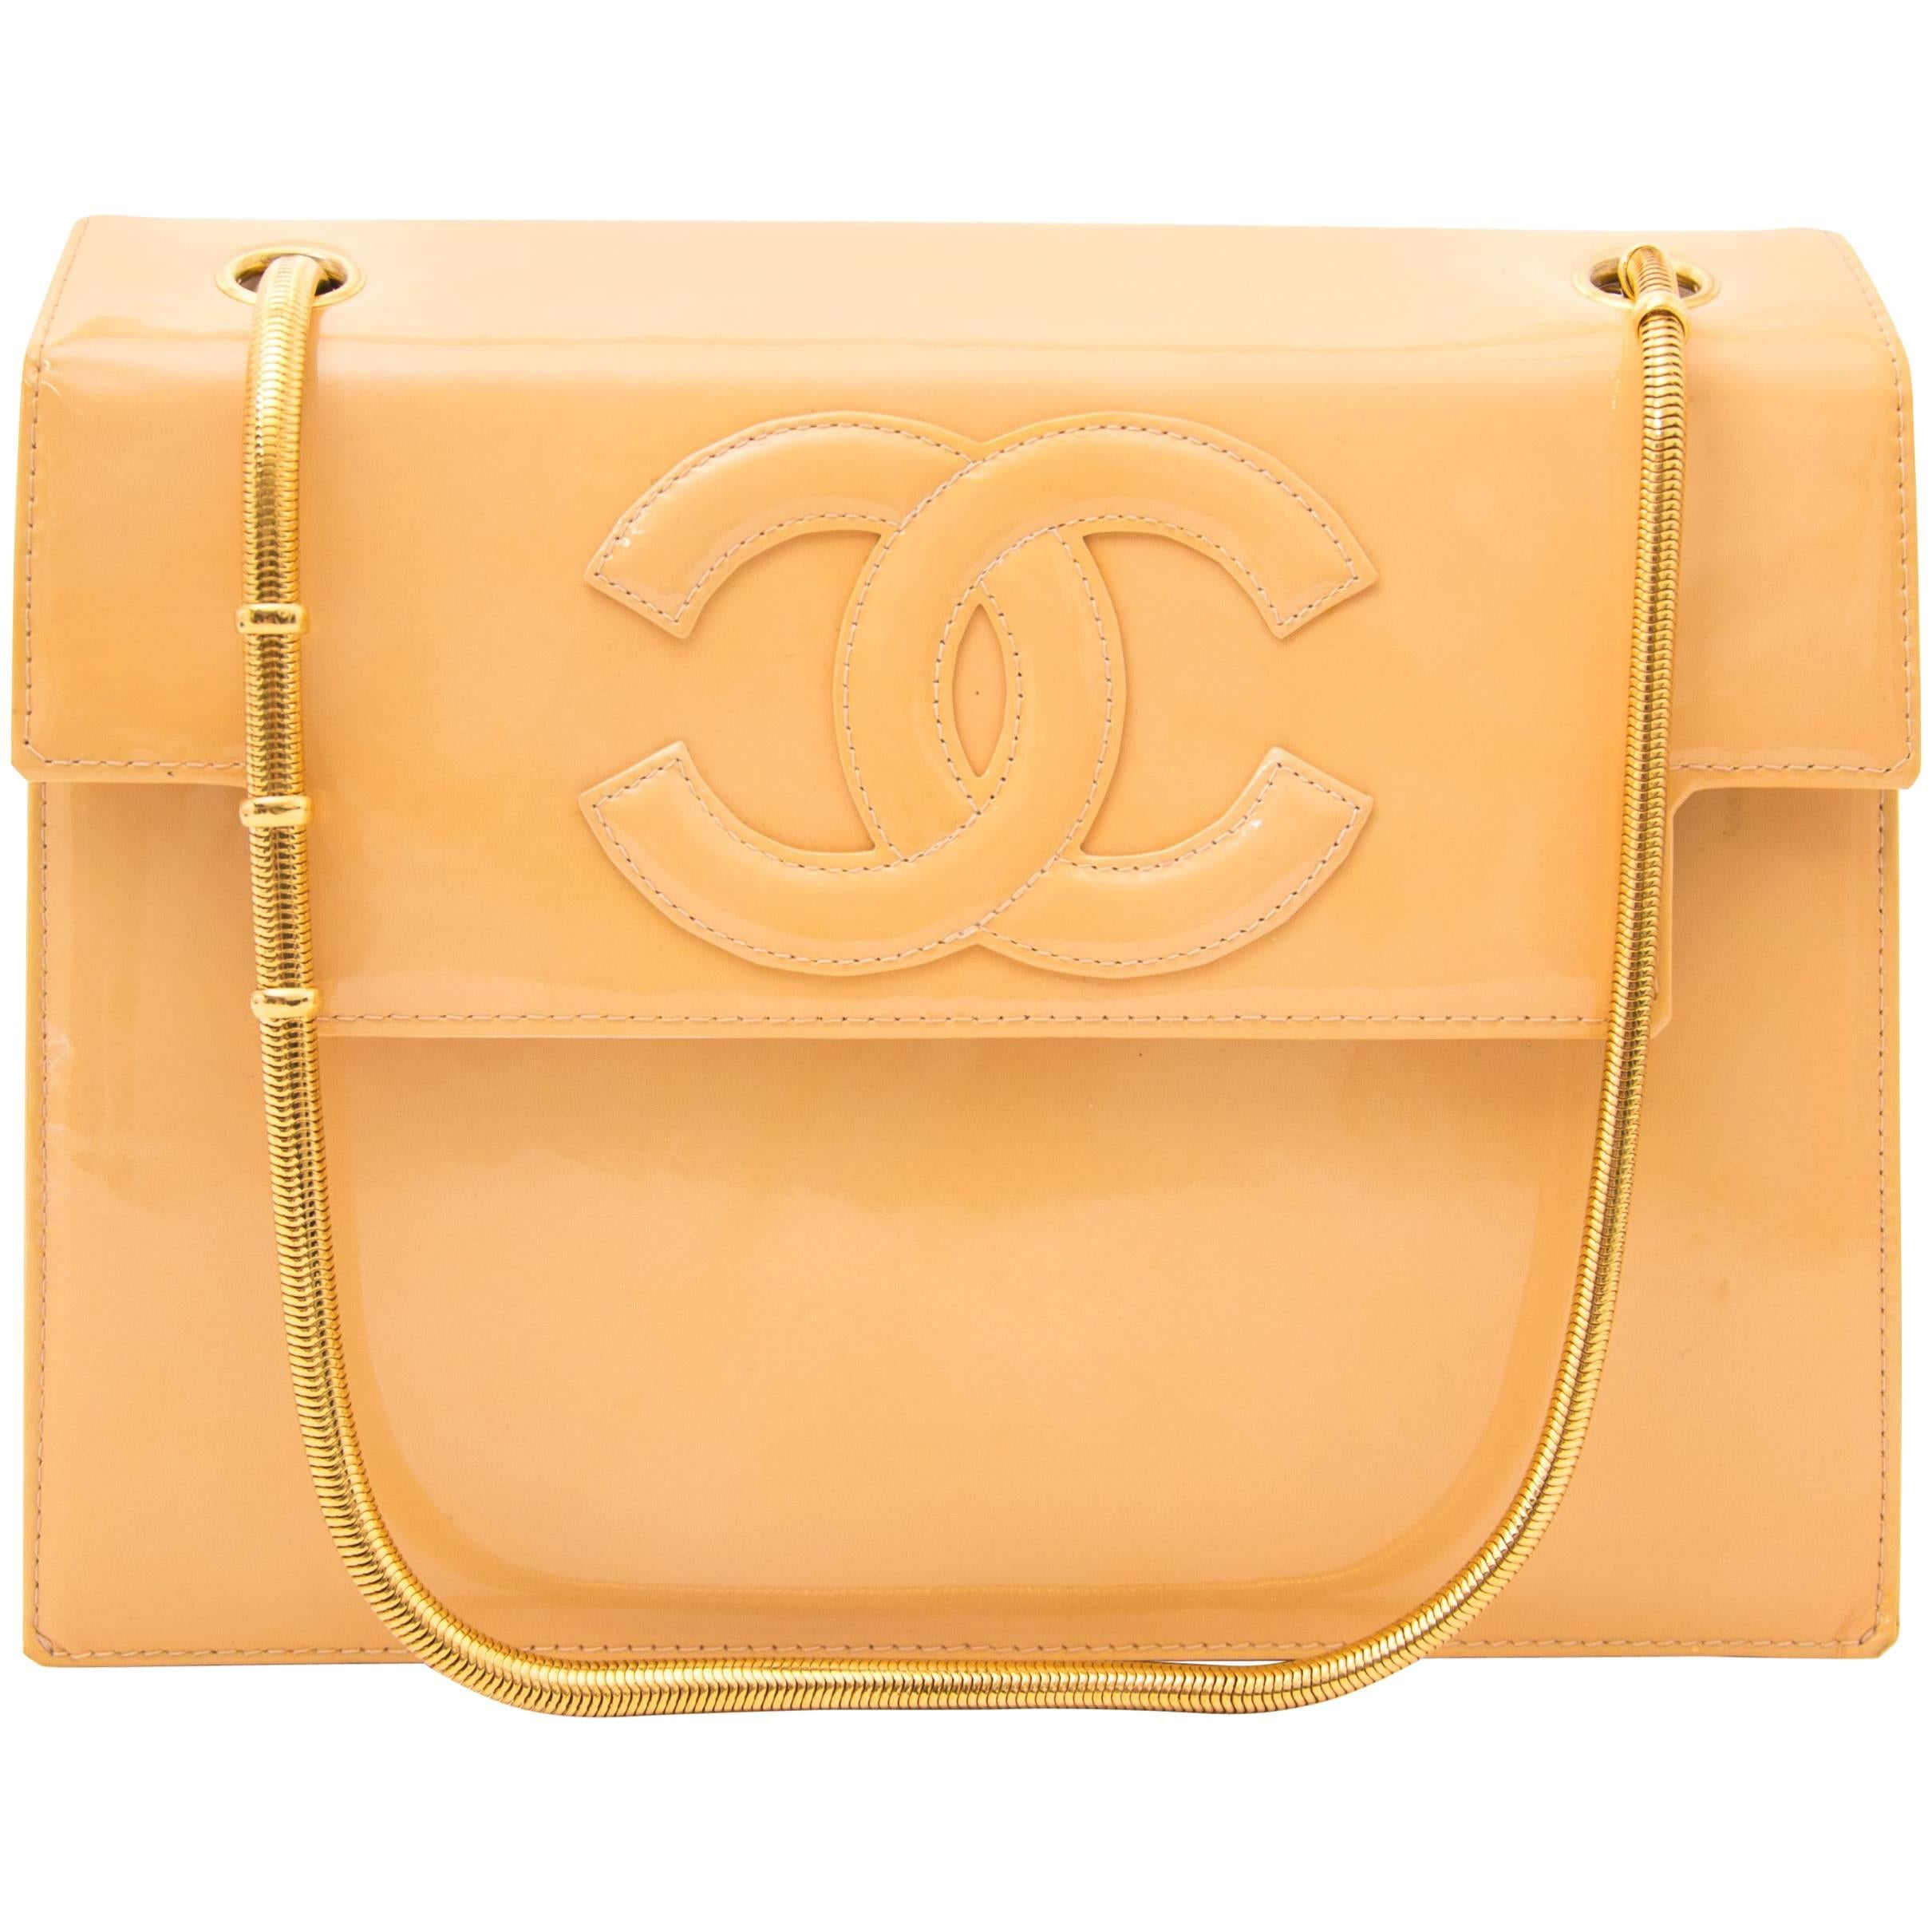 Chanel Moutarde Patent Flap Bag